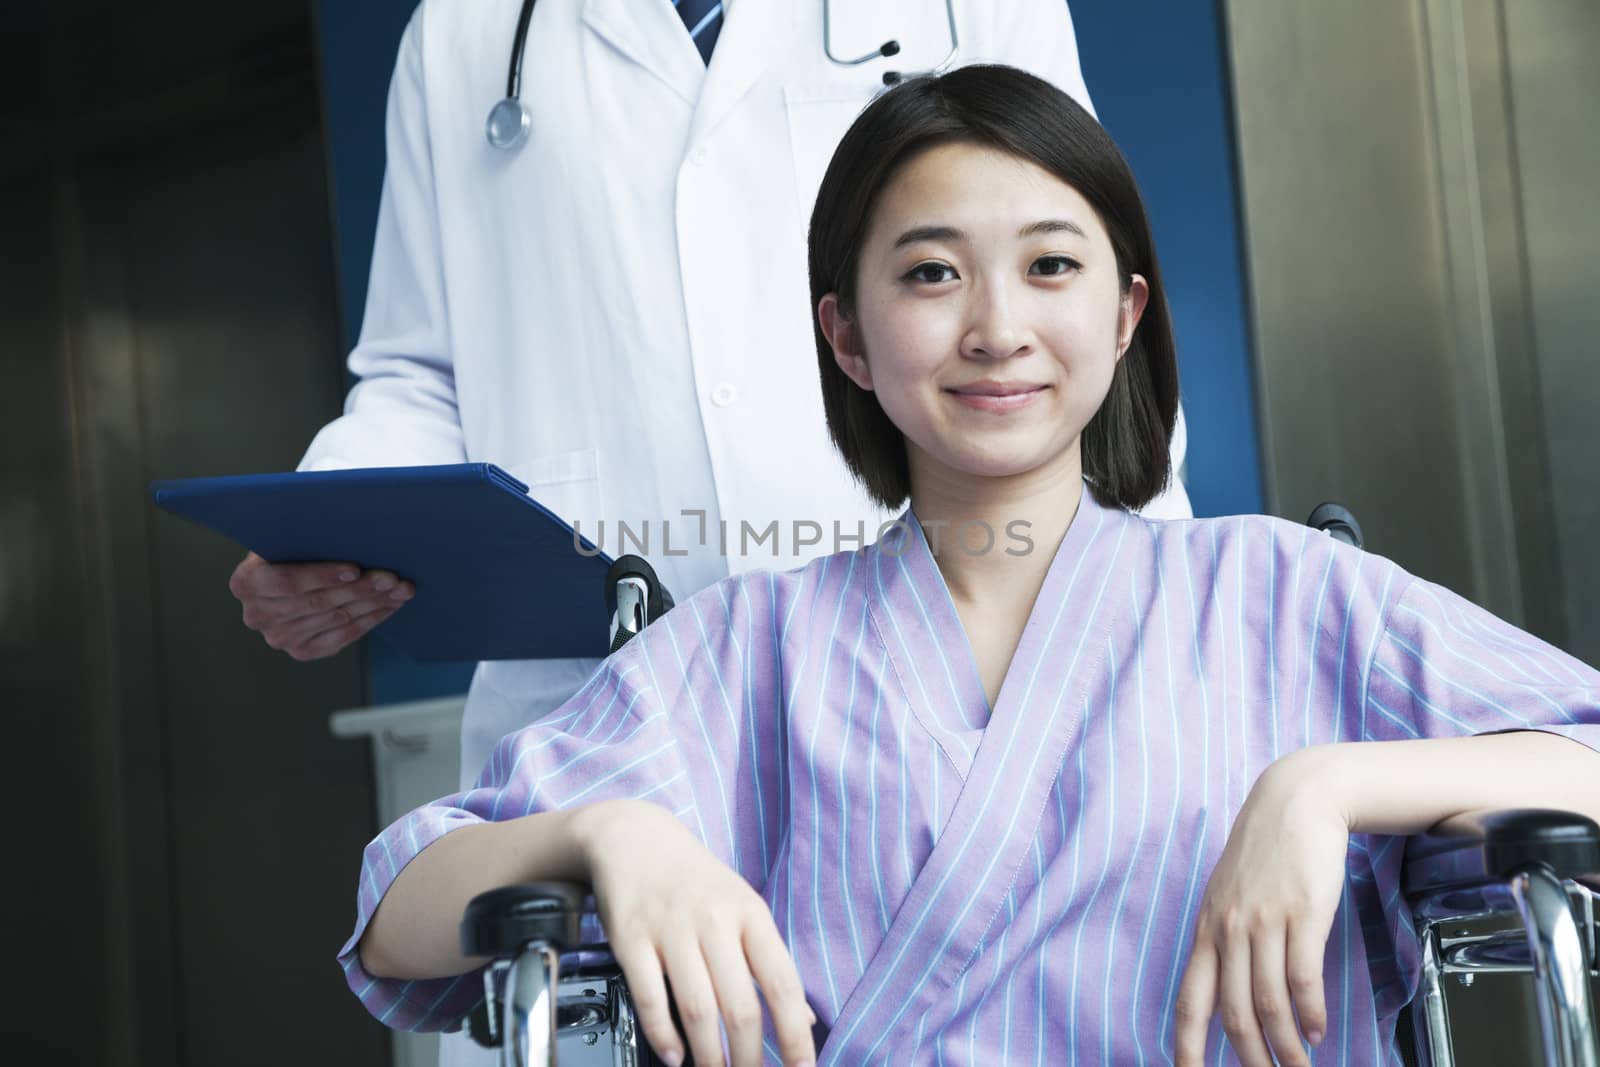 Young smiling female patient sitting in a wheelchair, doctor standing behind her, looking at camera